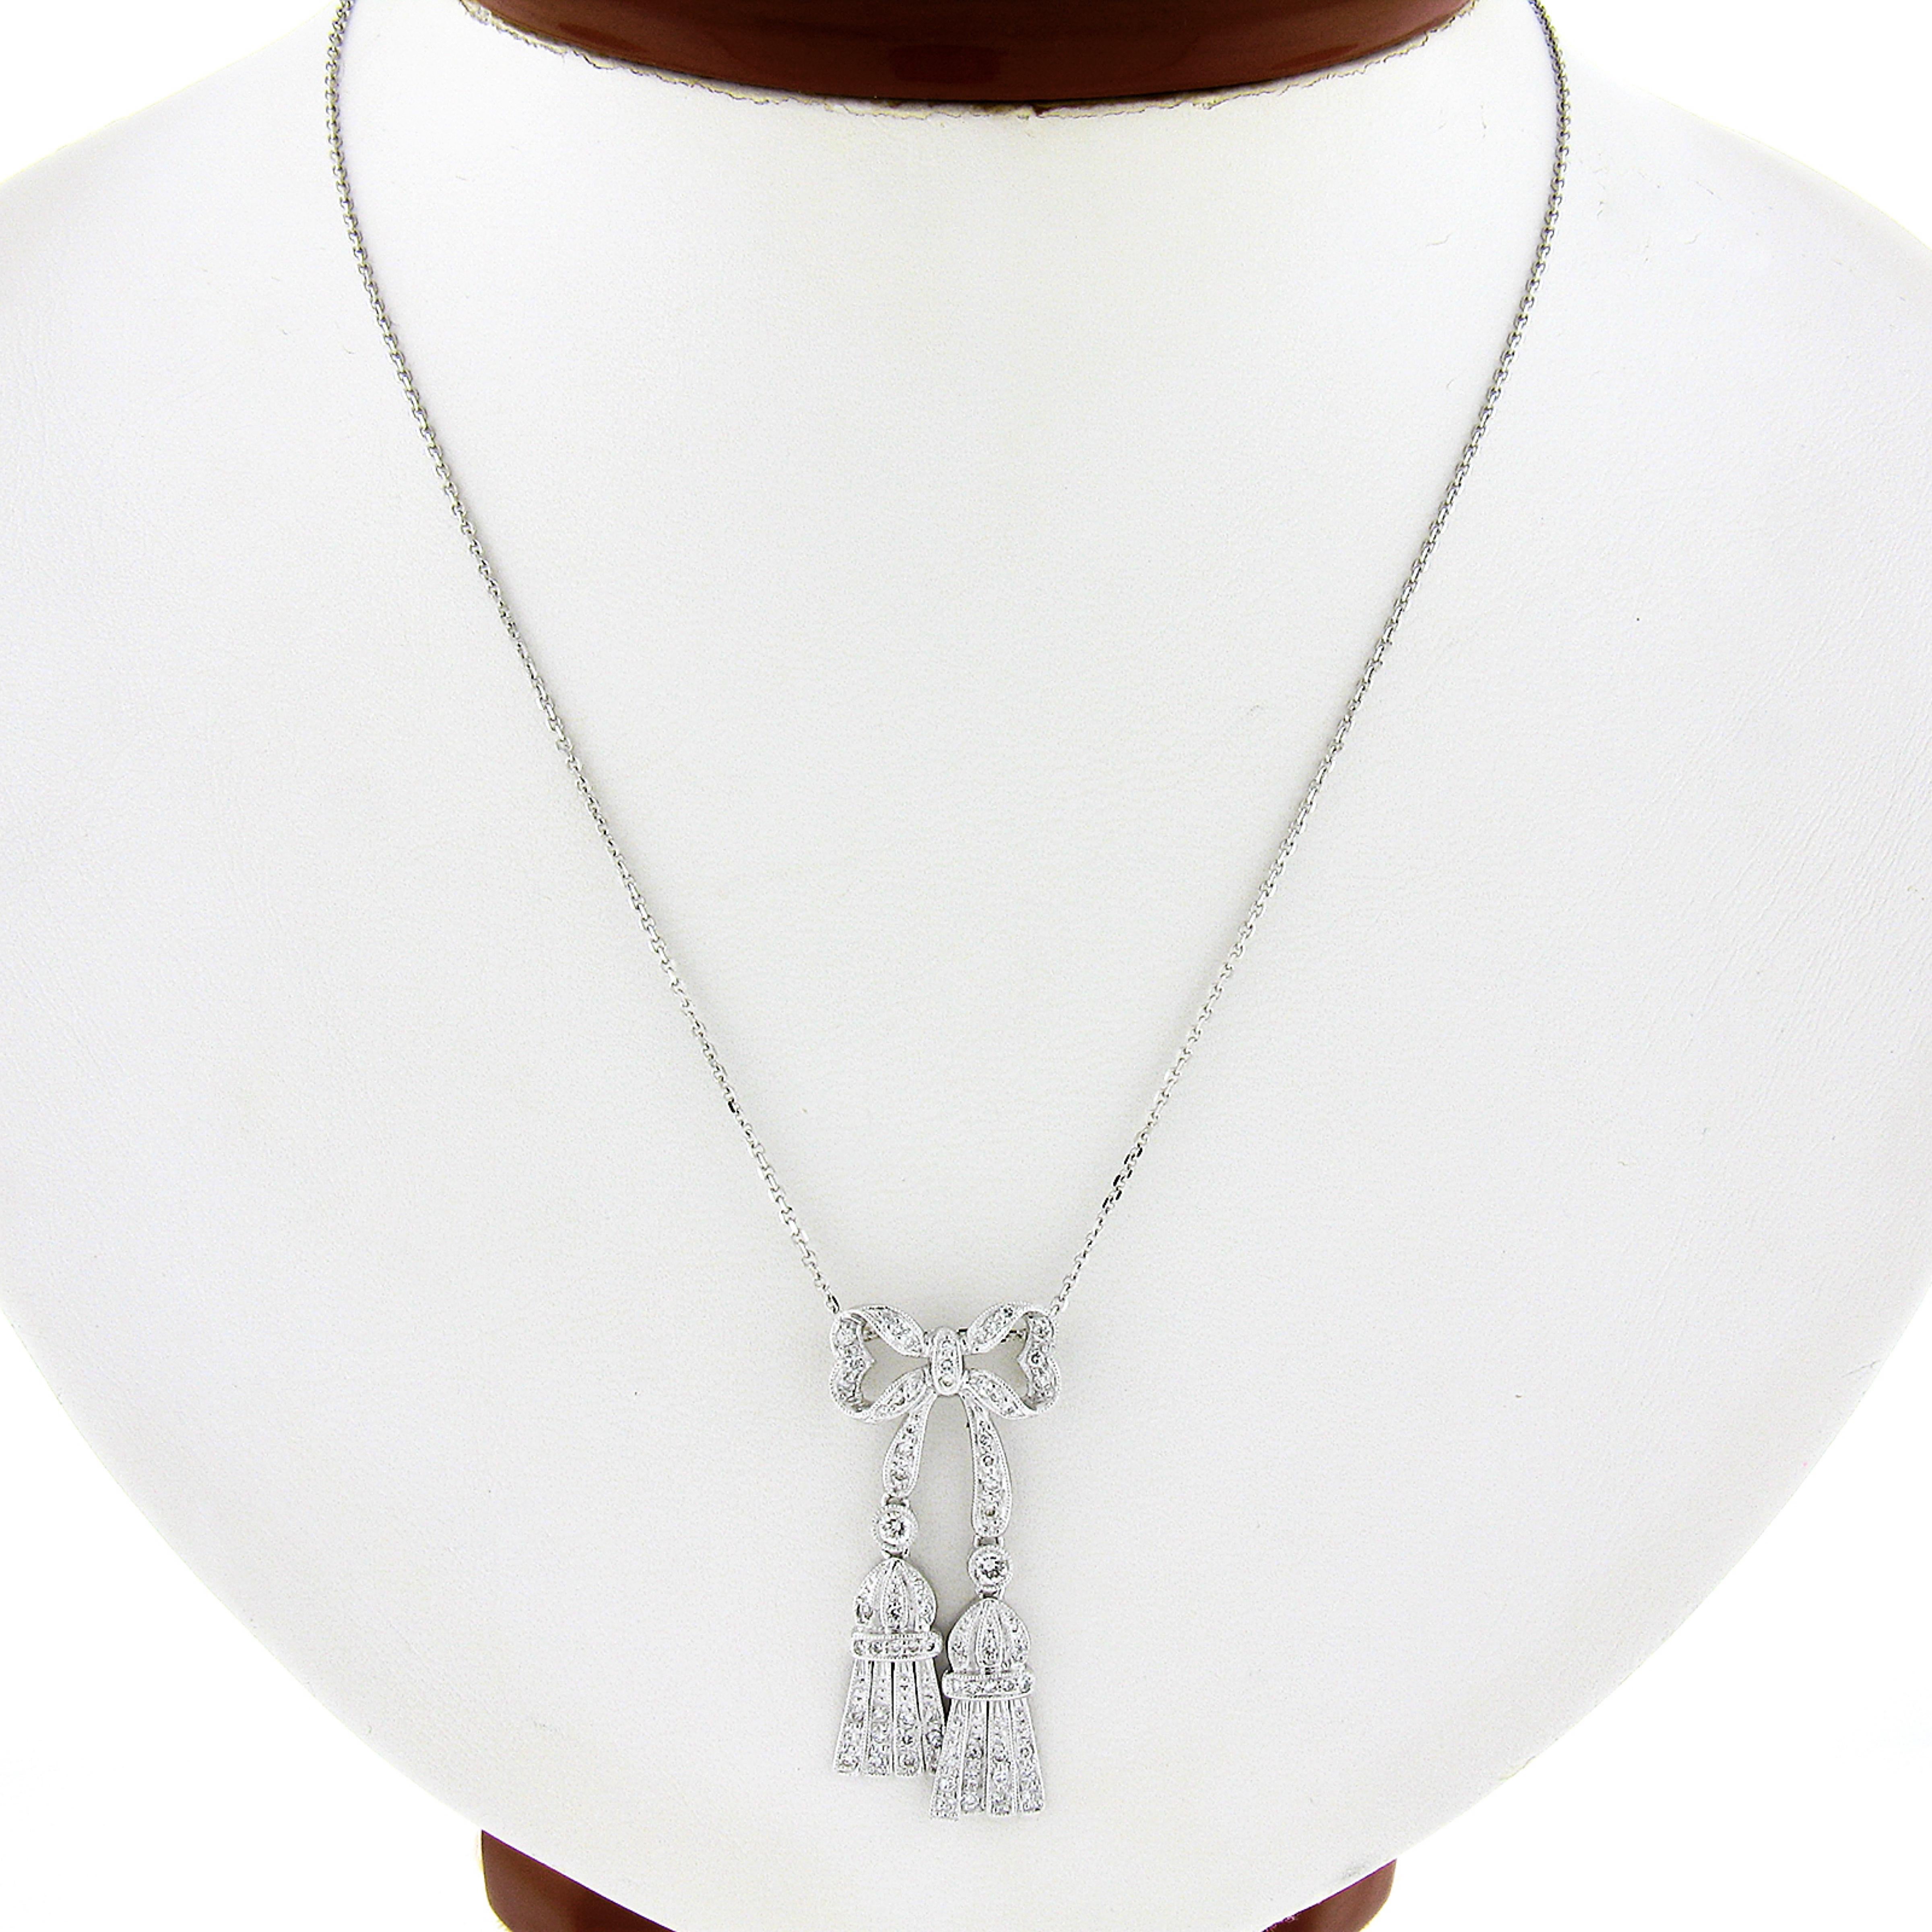 Here we have a beautiful pendant that was crafted in solid 18k white gold and styled as a bow. It features milgrain open work dangle tassels all set with fiery brilliant diamonds! It hangs from a 14k white gold cable link chain that is adjustable to